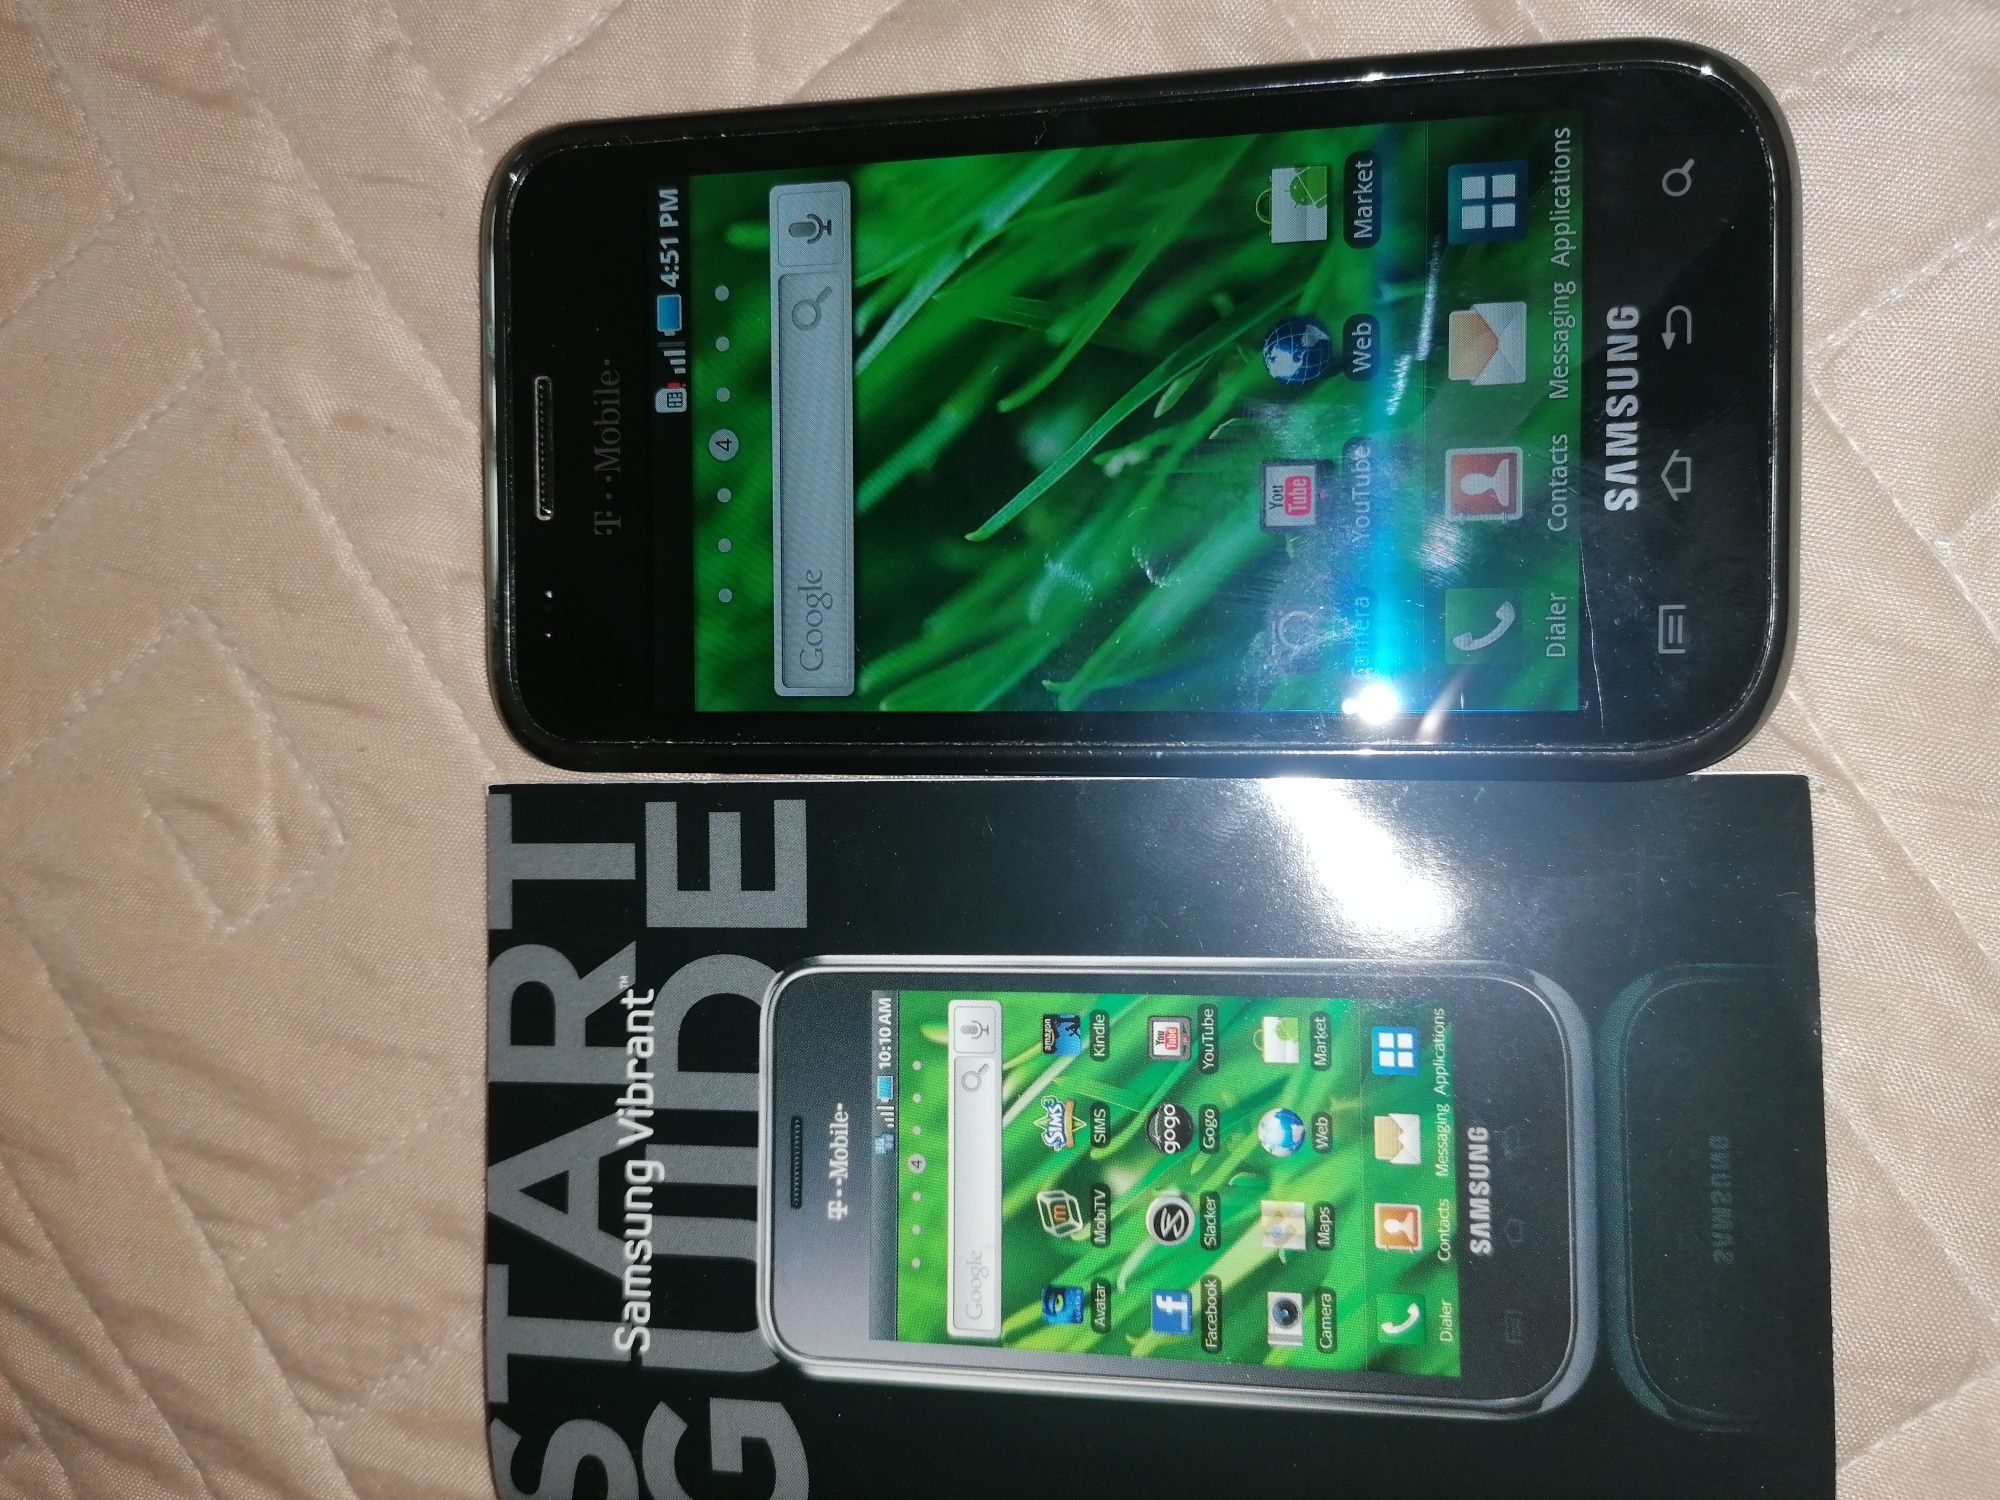 Samsung Galaxy S T959 T-Mobile